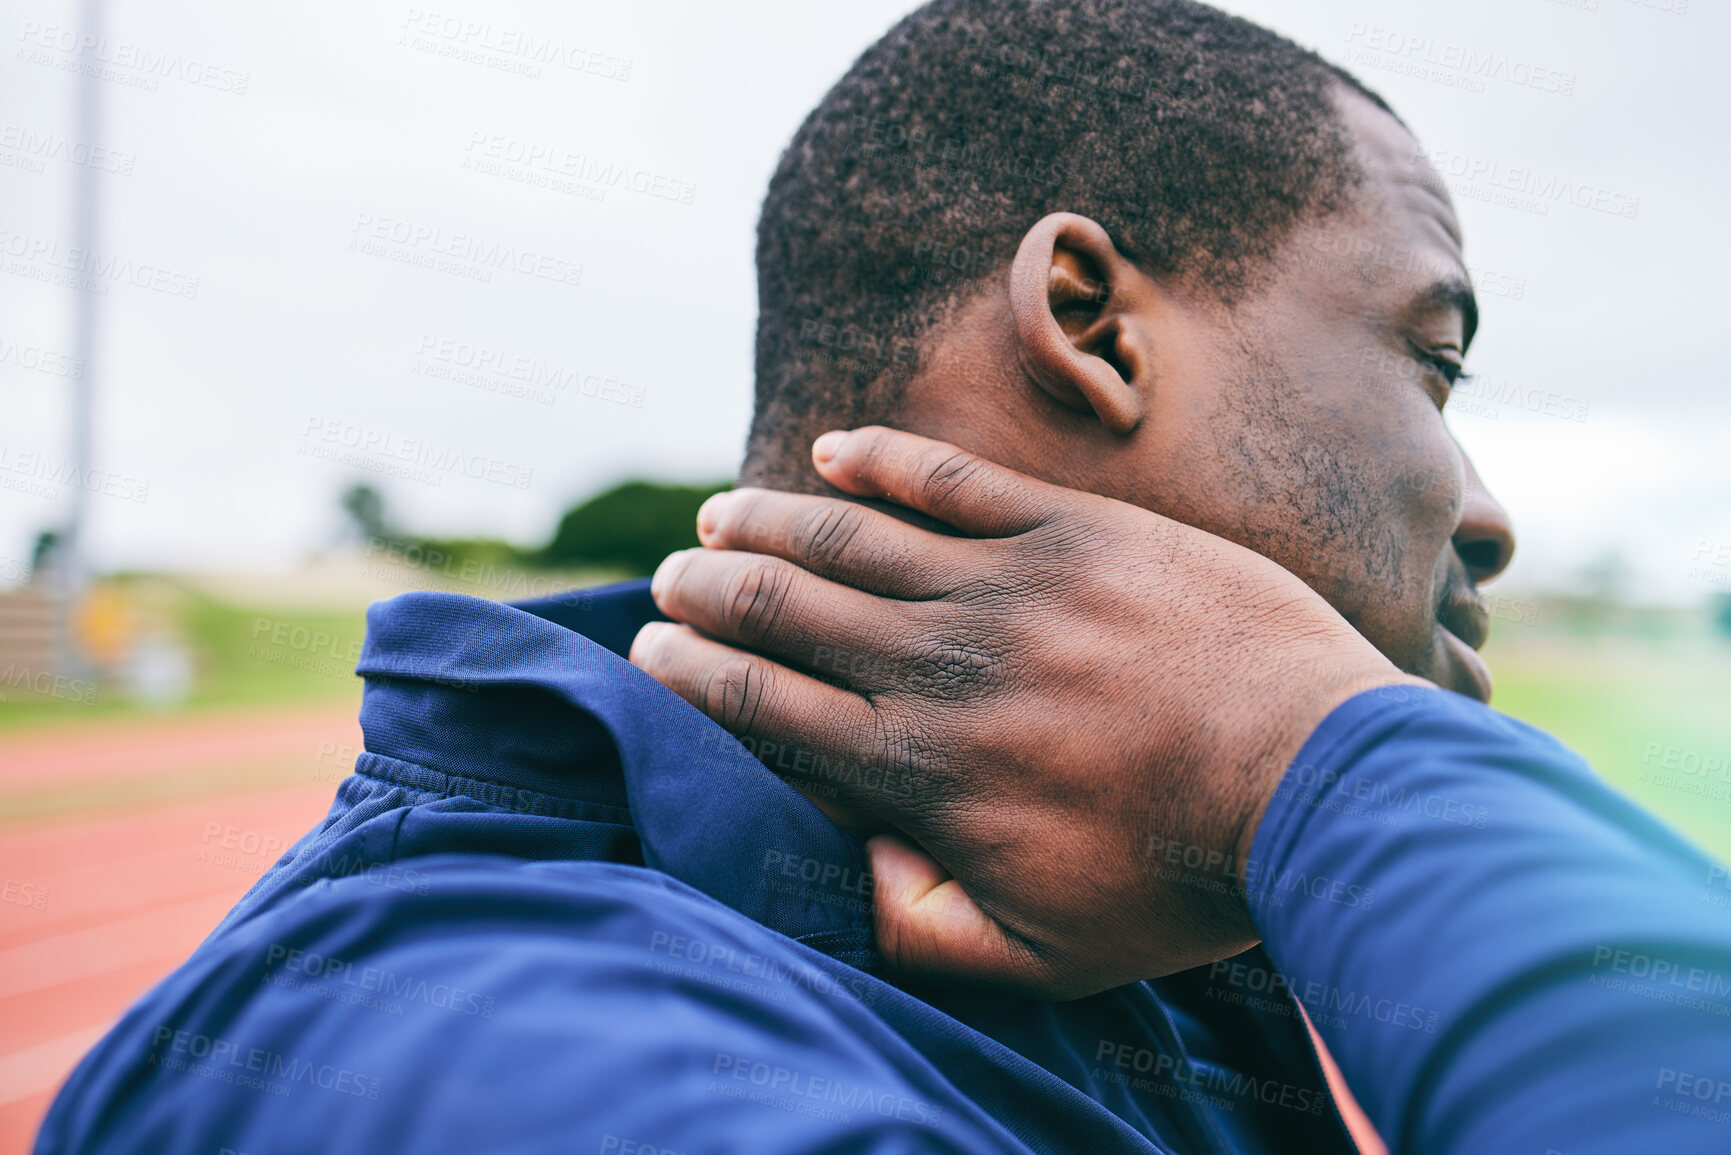 Buy stock photo Black man, neck pain and injury after exercise, workout or training accident at stadium. Winter sports, fitness and male athlete with fibromyalgia, inflammation and painful muscles after running.